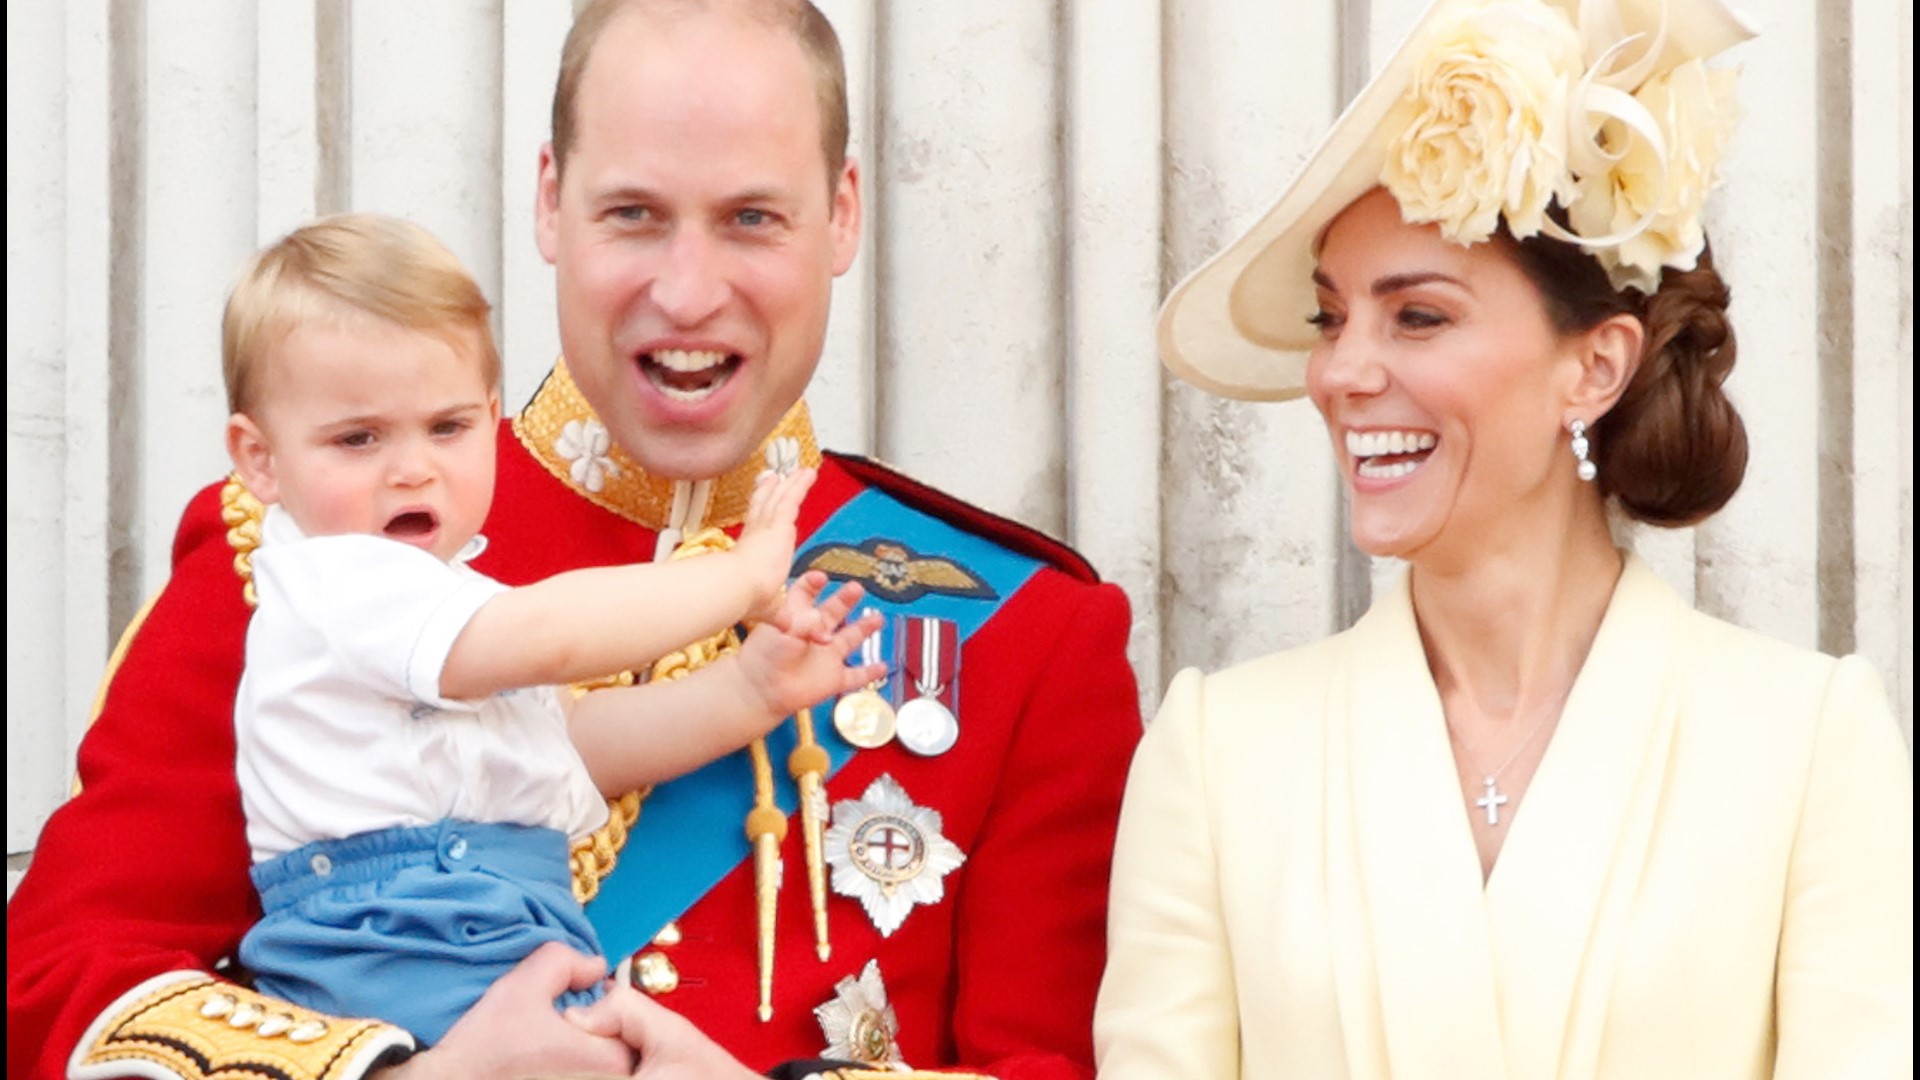 What's predicted for the royal couple over their next decade? Buzz60's Chloe Hurst has the story!